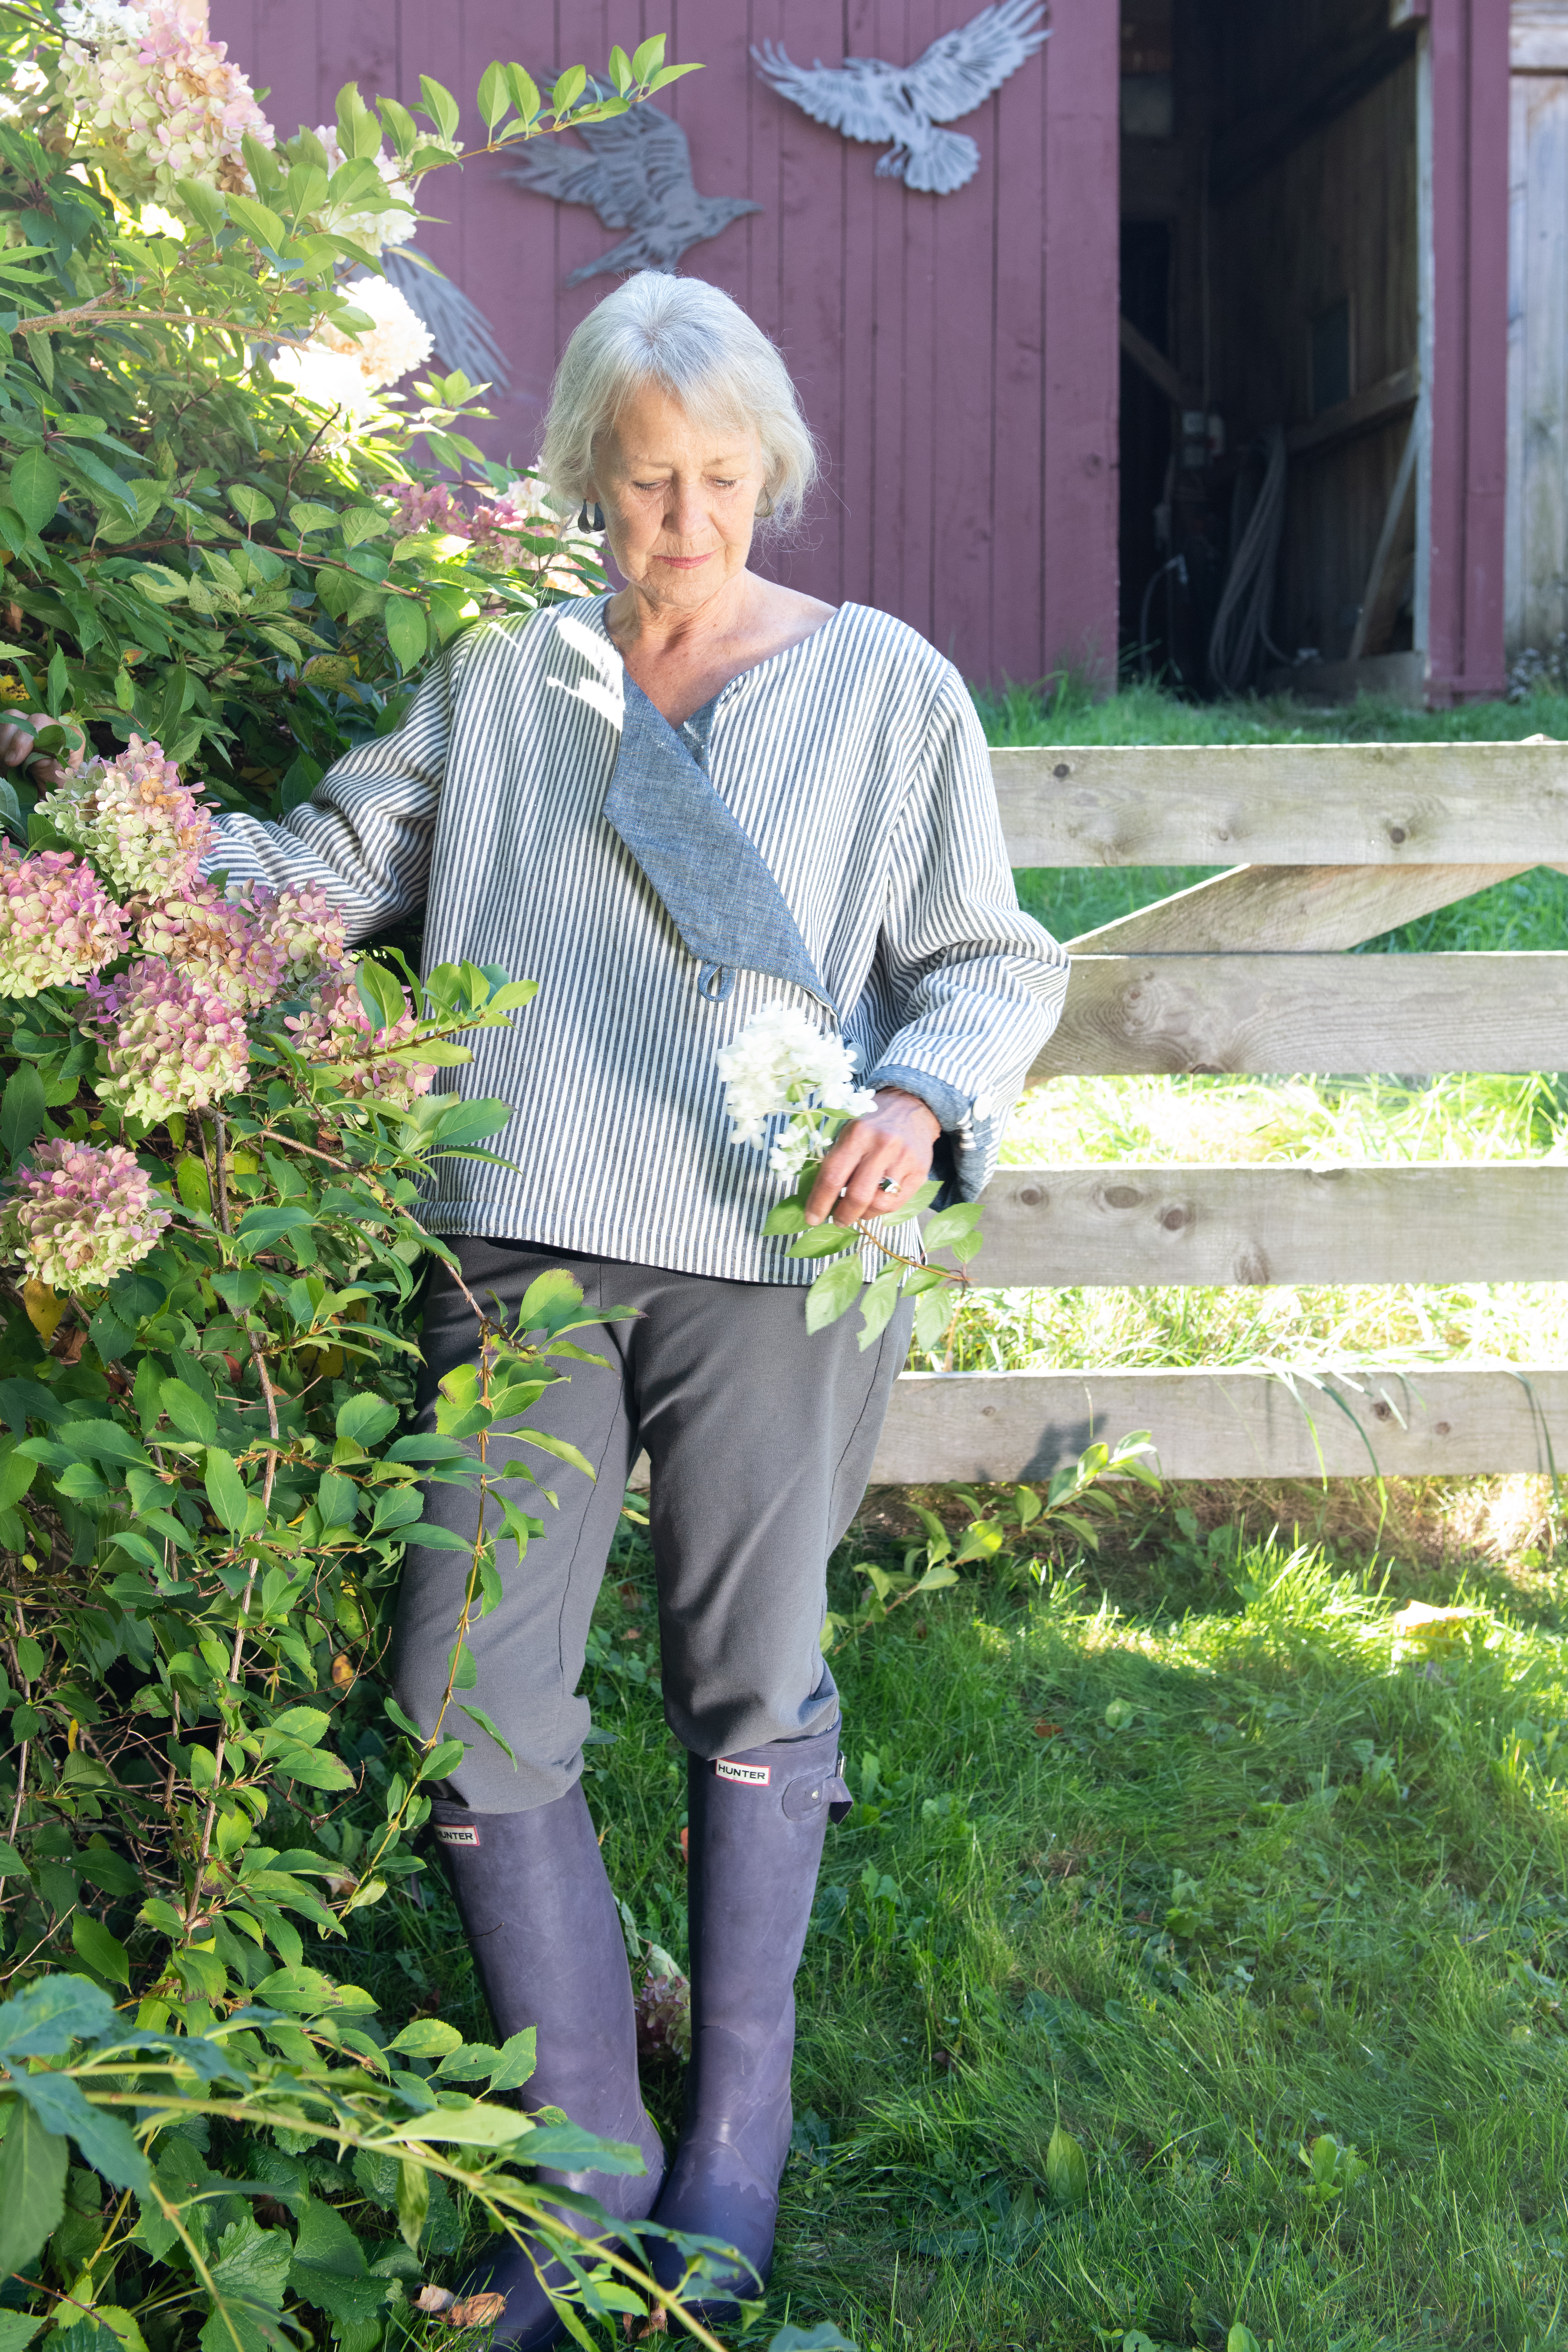 June, in the blue Latchkey jacket, standing next to hydrangeas and looking down